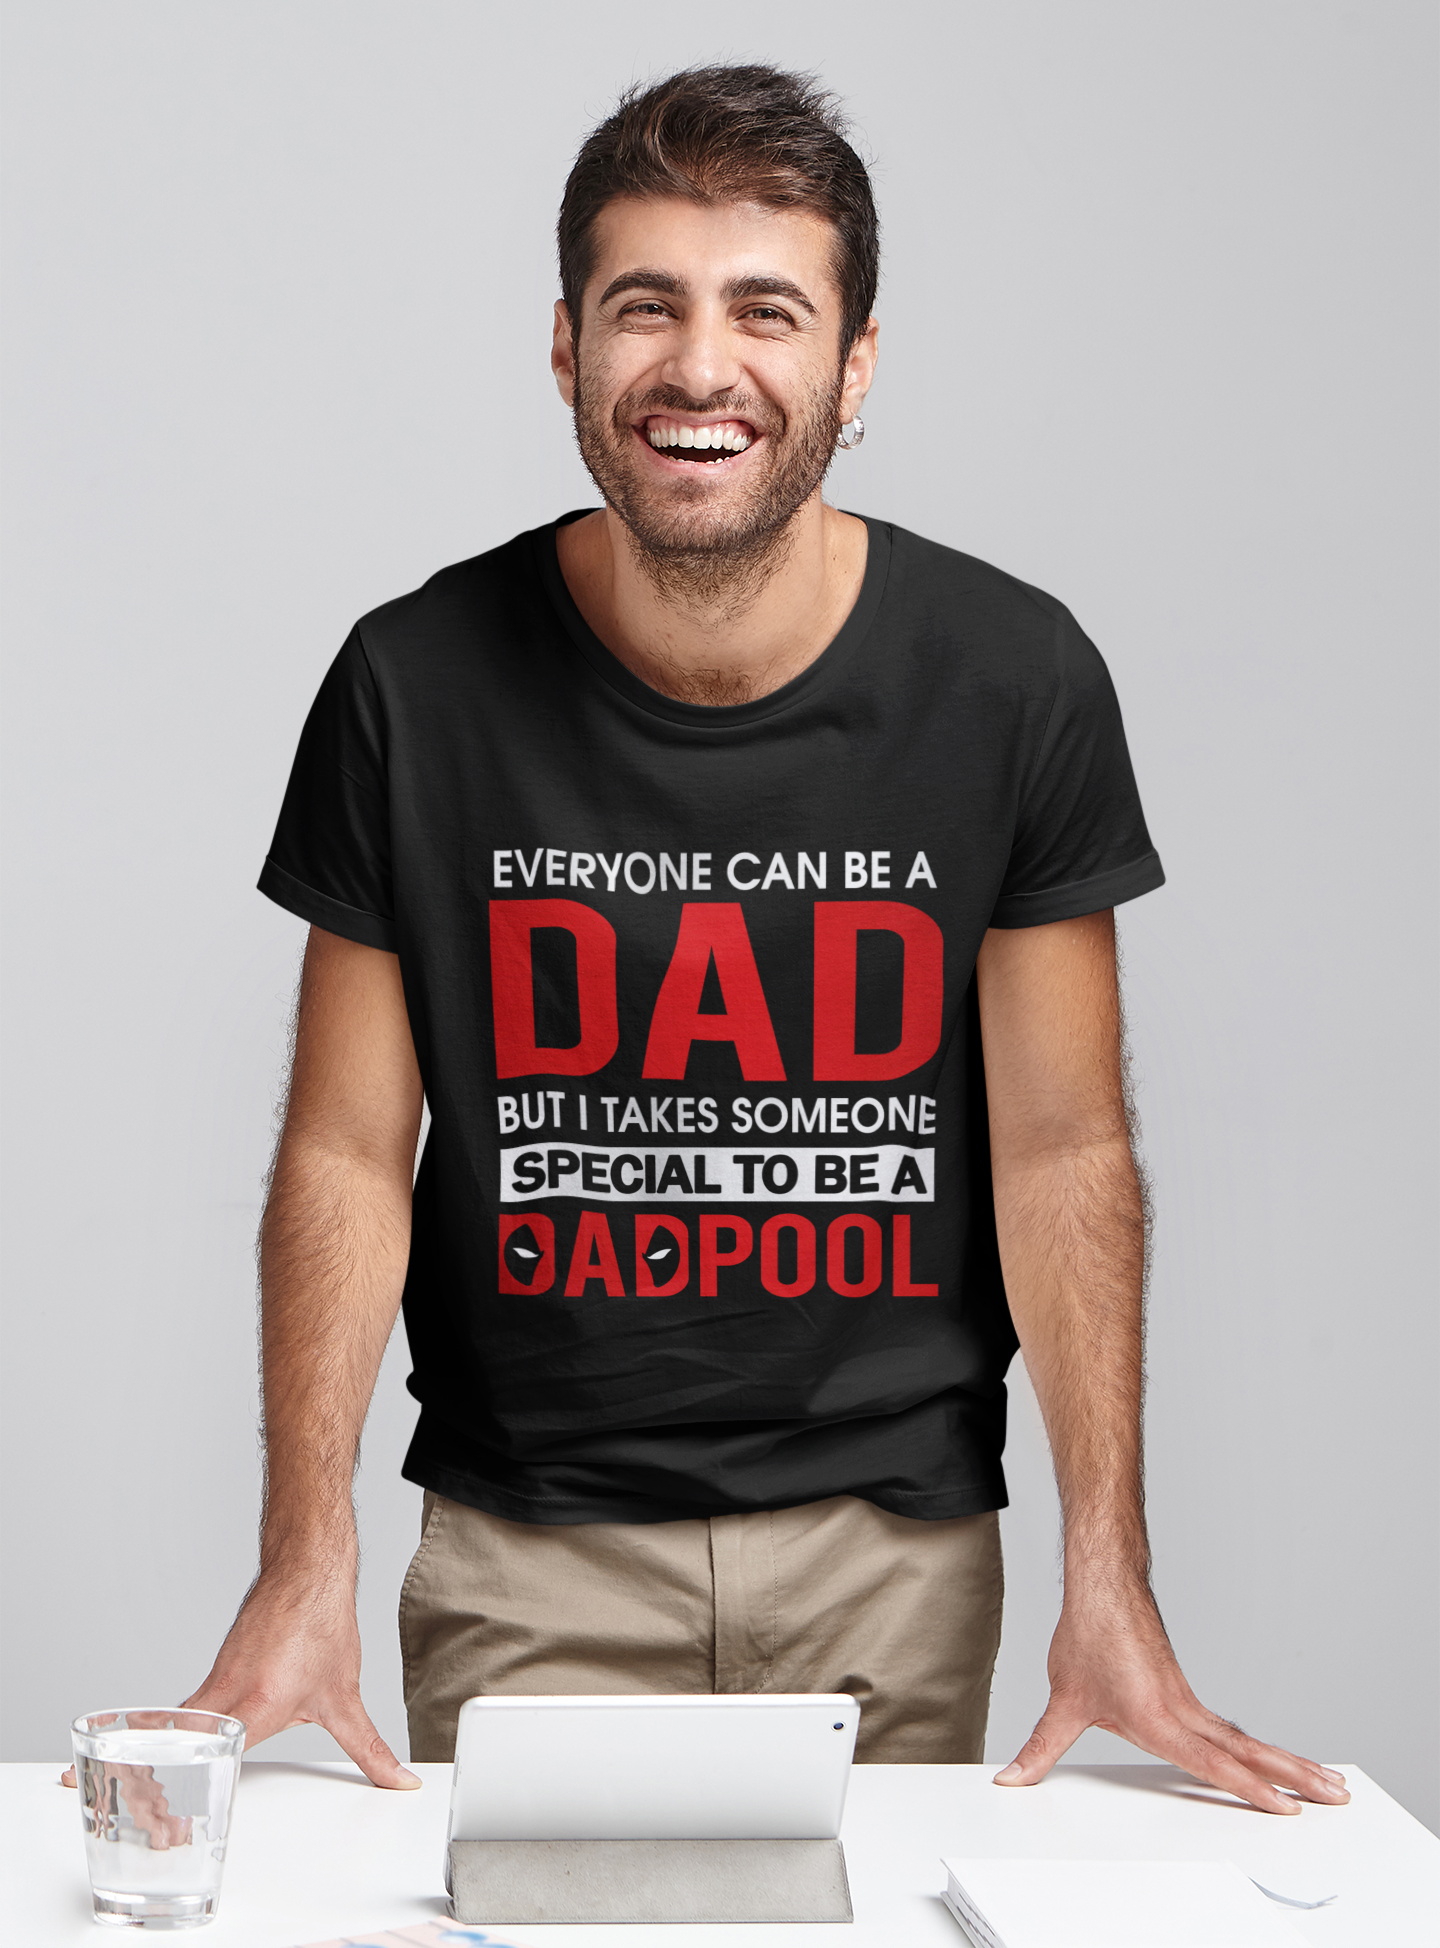 Deadpool T Shirt, Superhero Deadpool T Shirt, I Takes Someone Special To Be A Dadpool Tshirt, Fathers Day Gifts